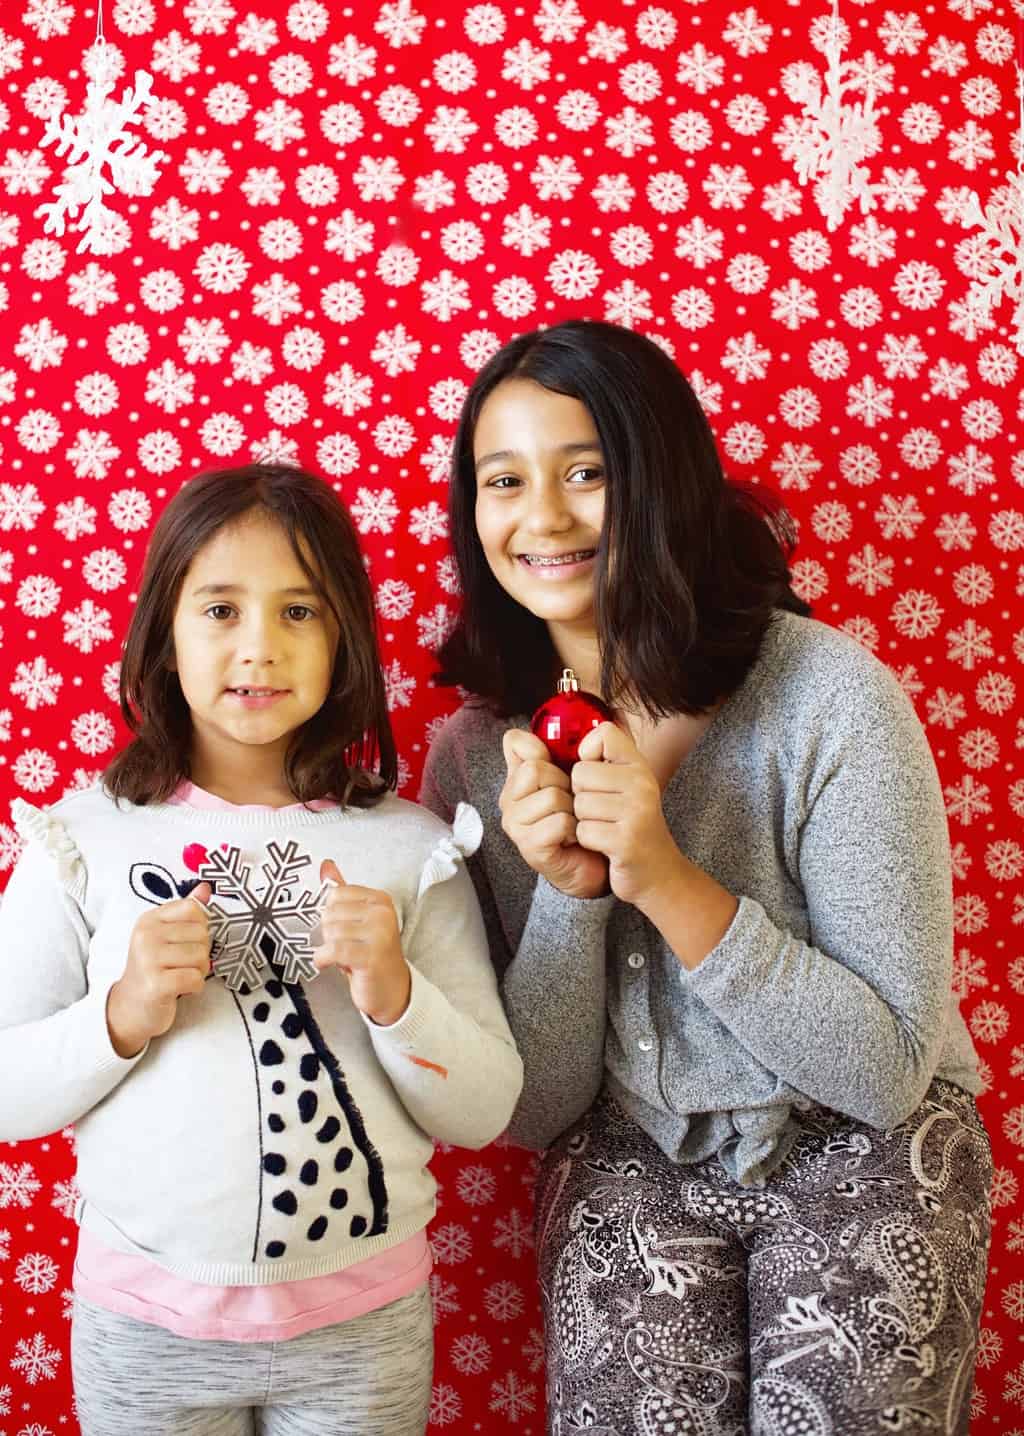 How to make a holiday photobooth